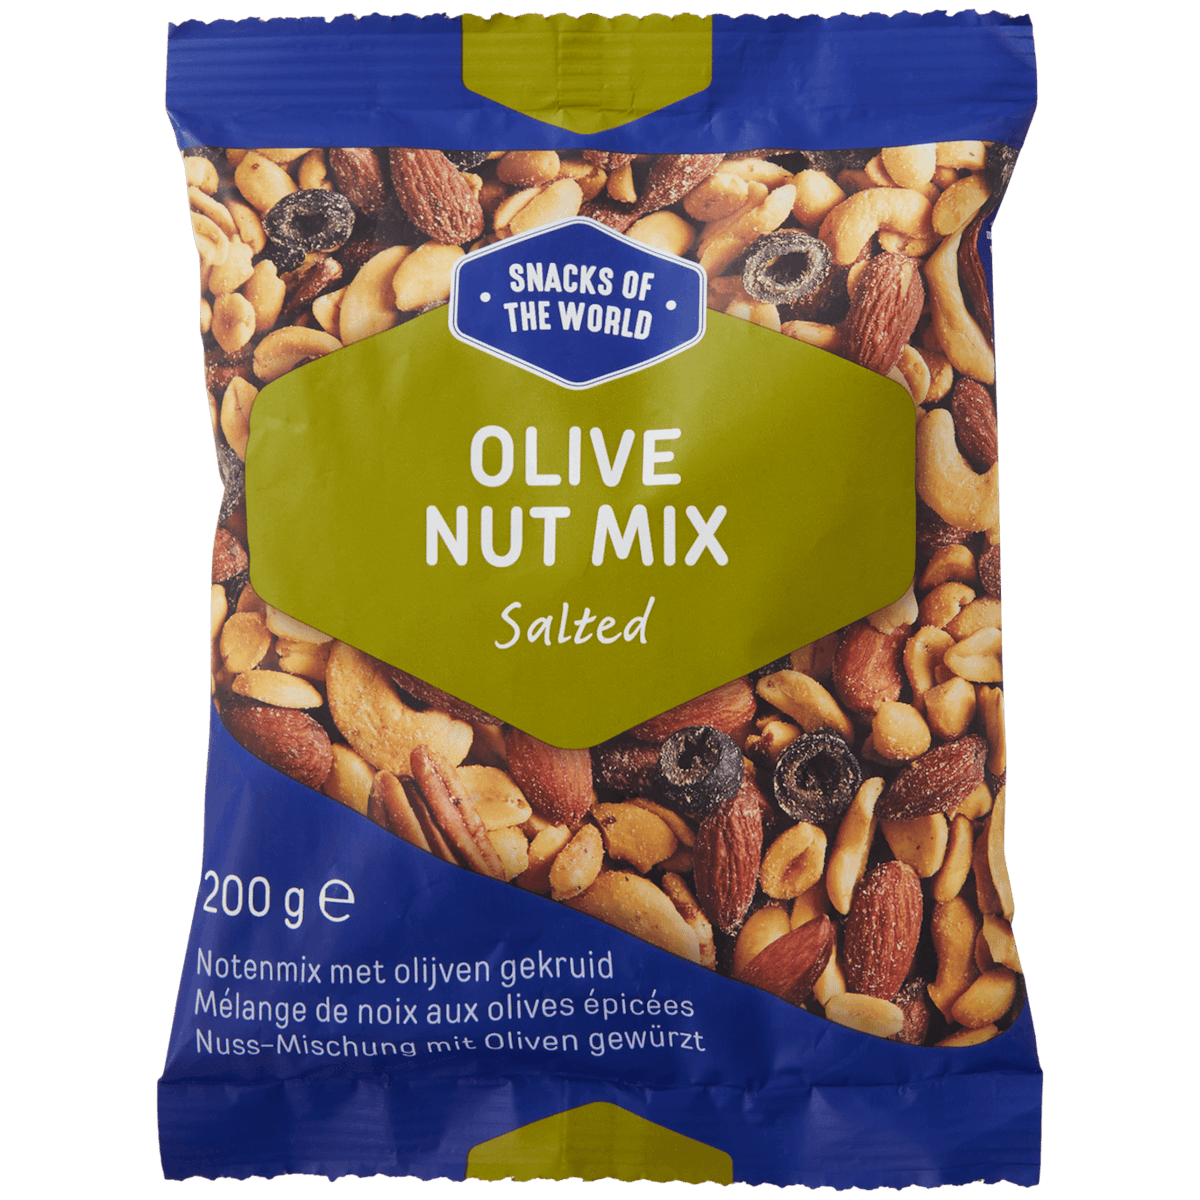 Snacks of the World Olive Nut Mix Salted